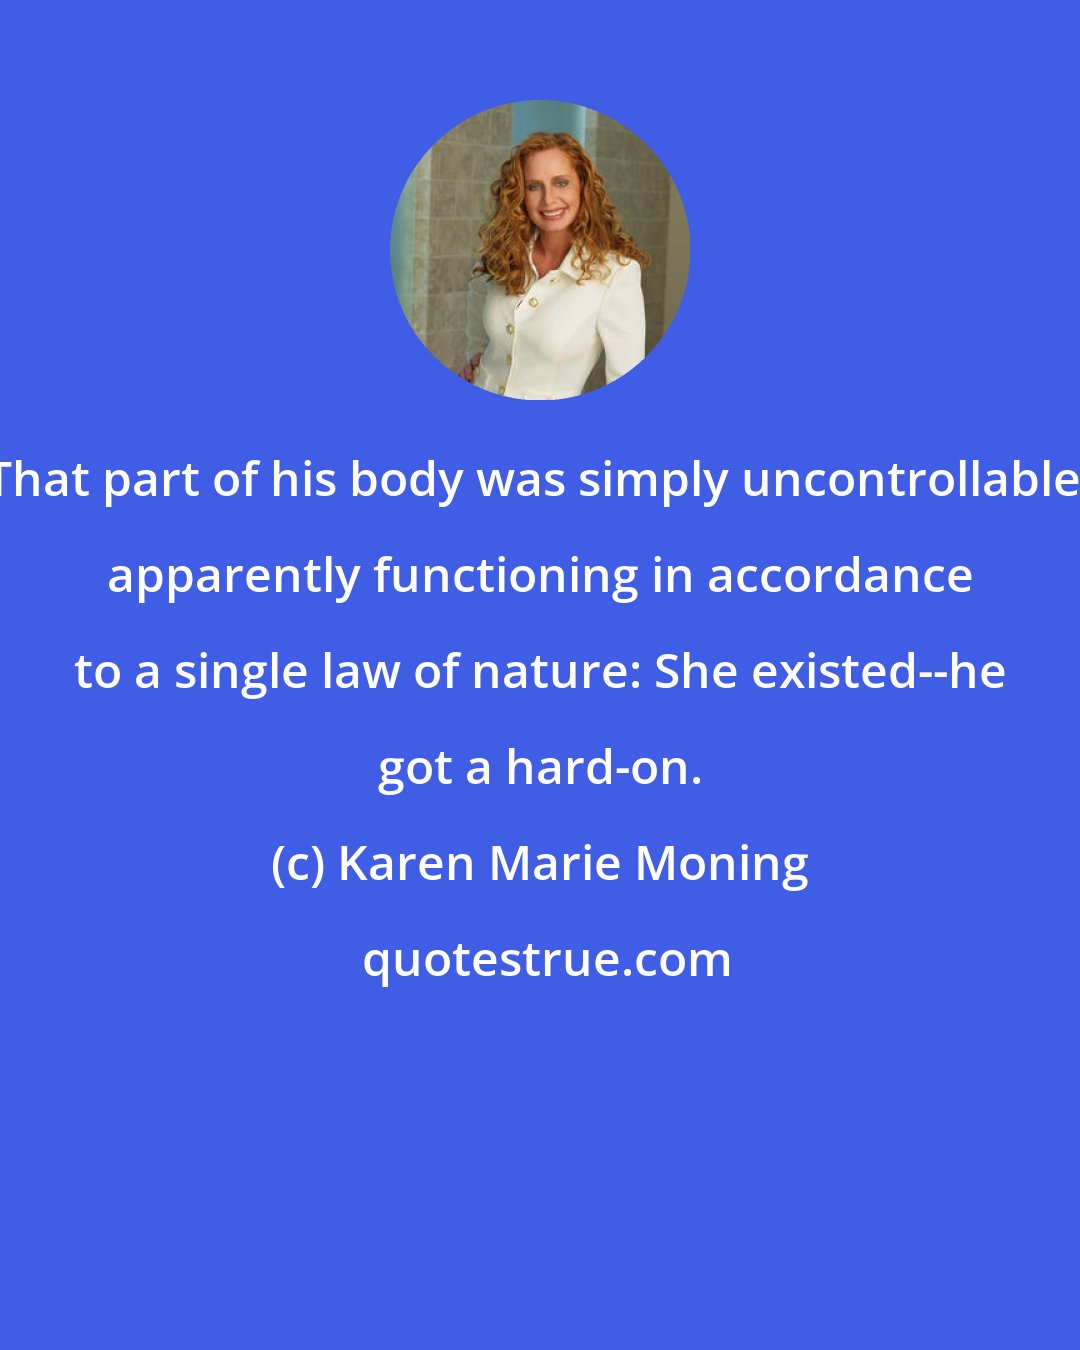 Karen Marie Moning: That part of his body was simply uncontrollable, apparently functioning in accordance to a single law of nature: She existed--he got a hard-on.